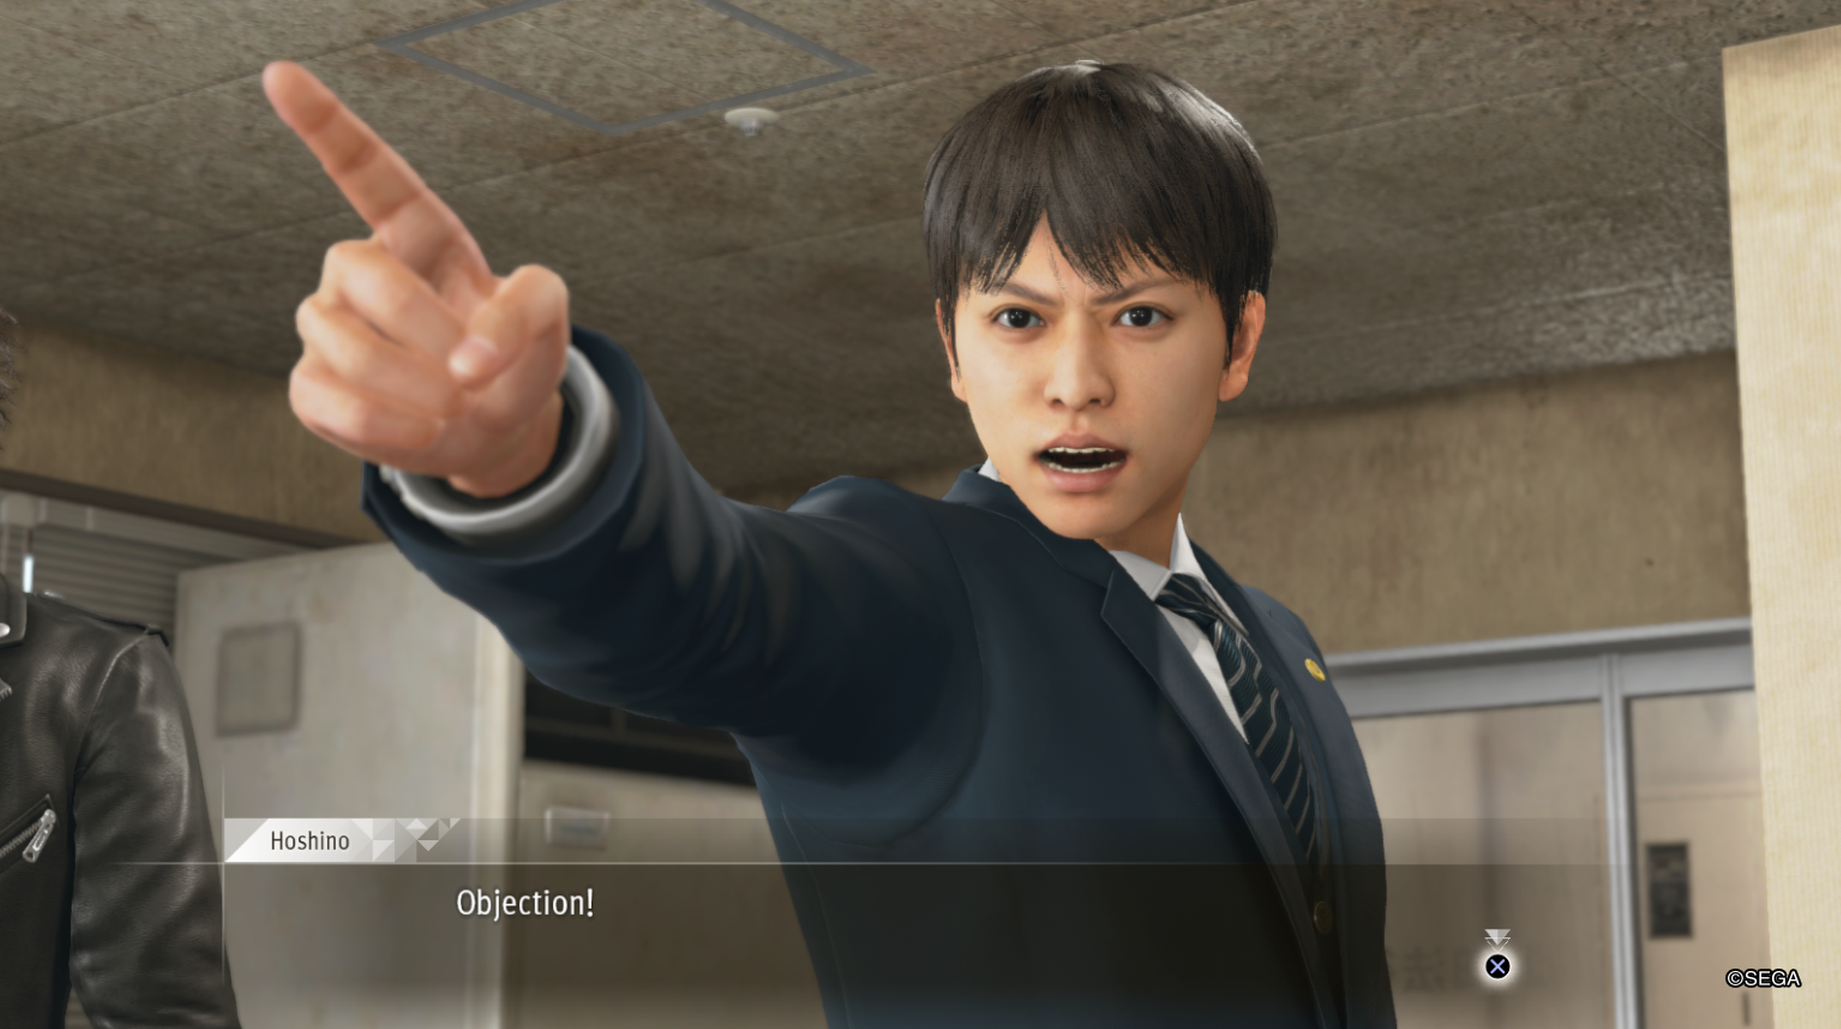 Judgment_objection.png